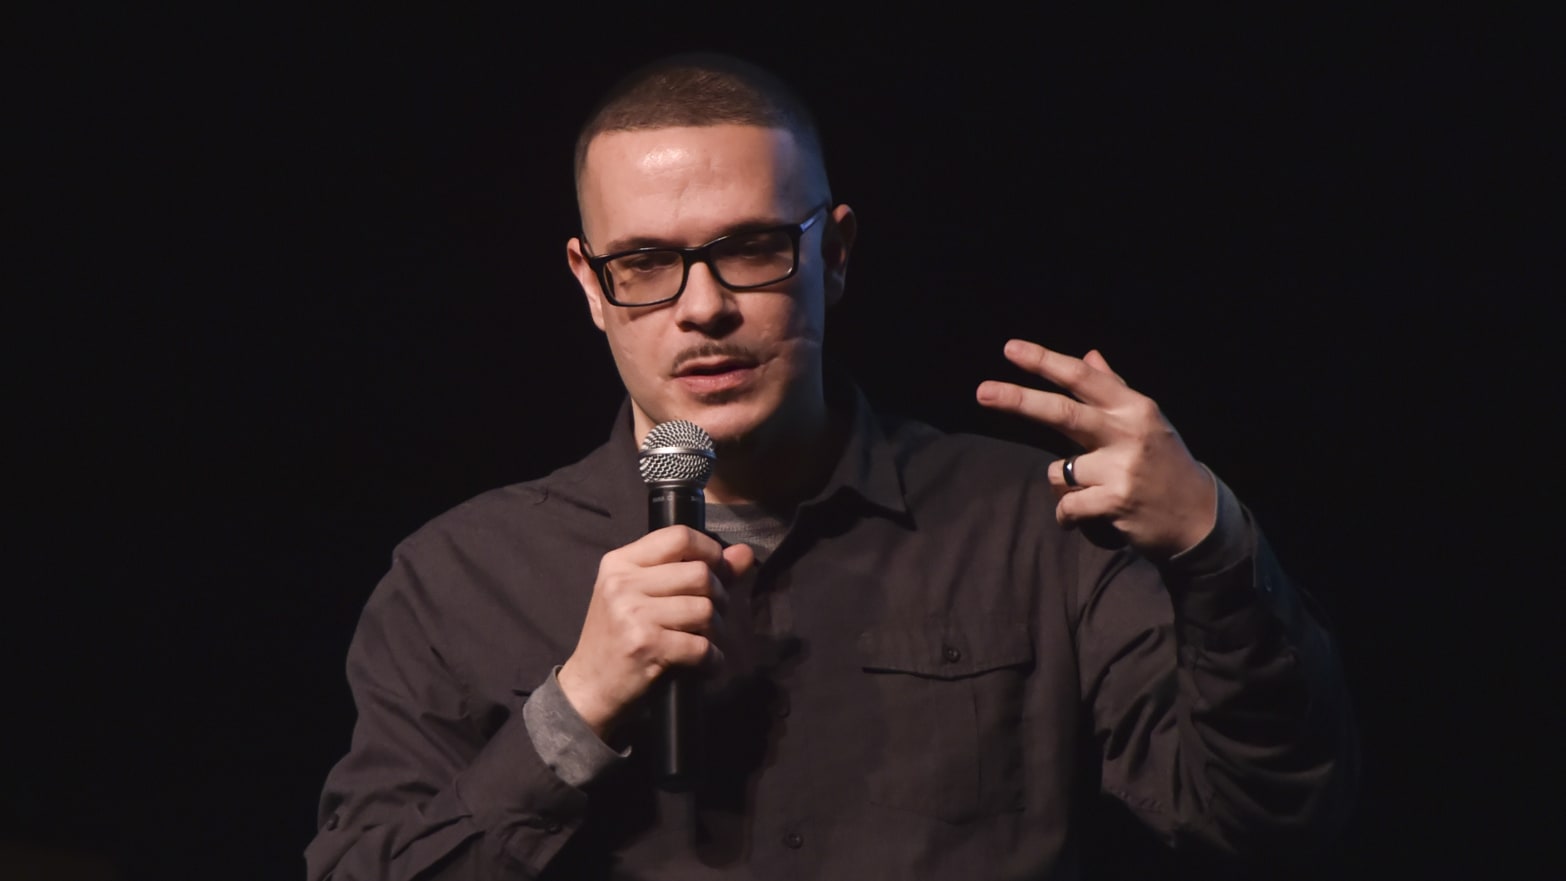 Shaun King speaks at Penn State Berks as part of their Arts and Lecture Series